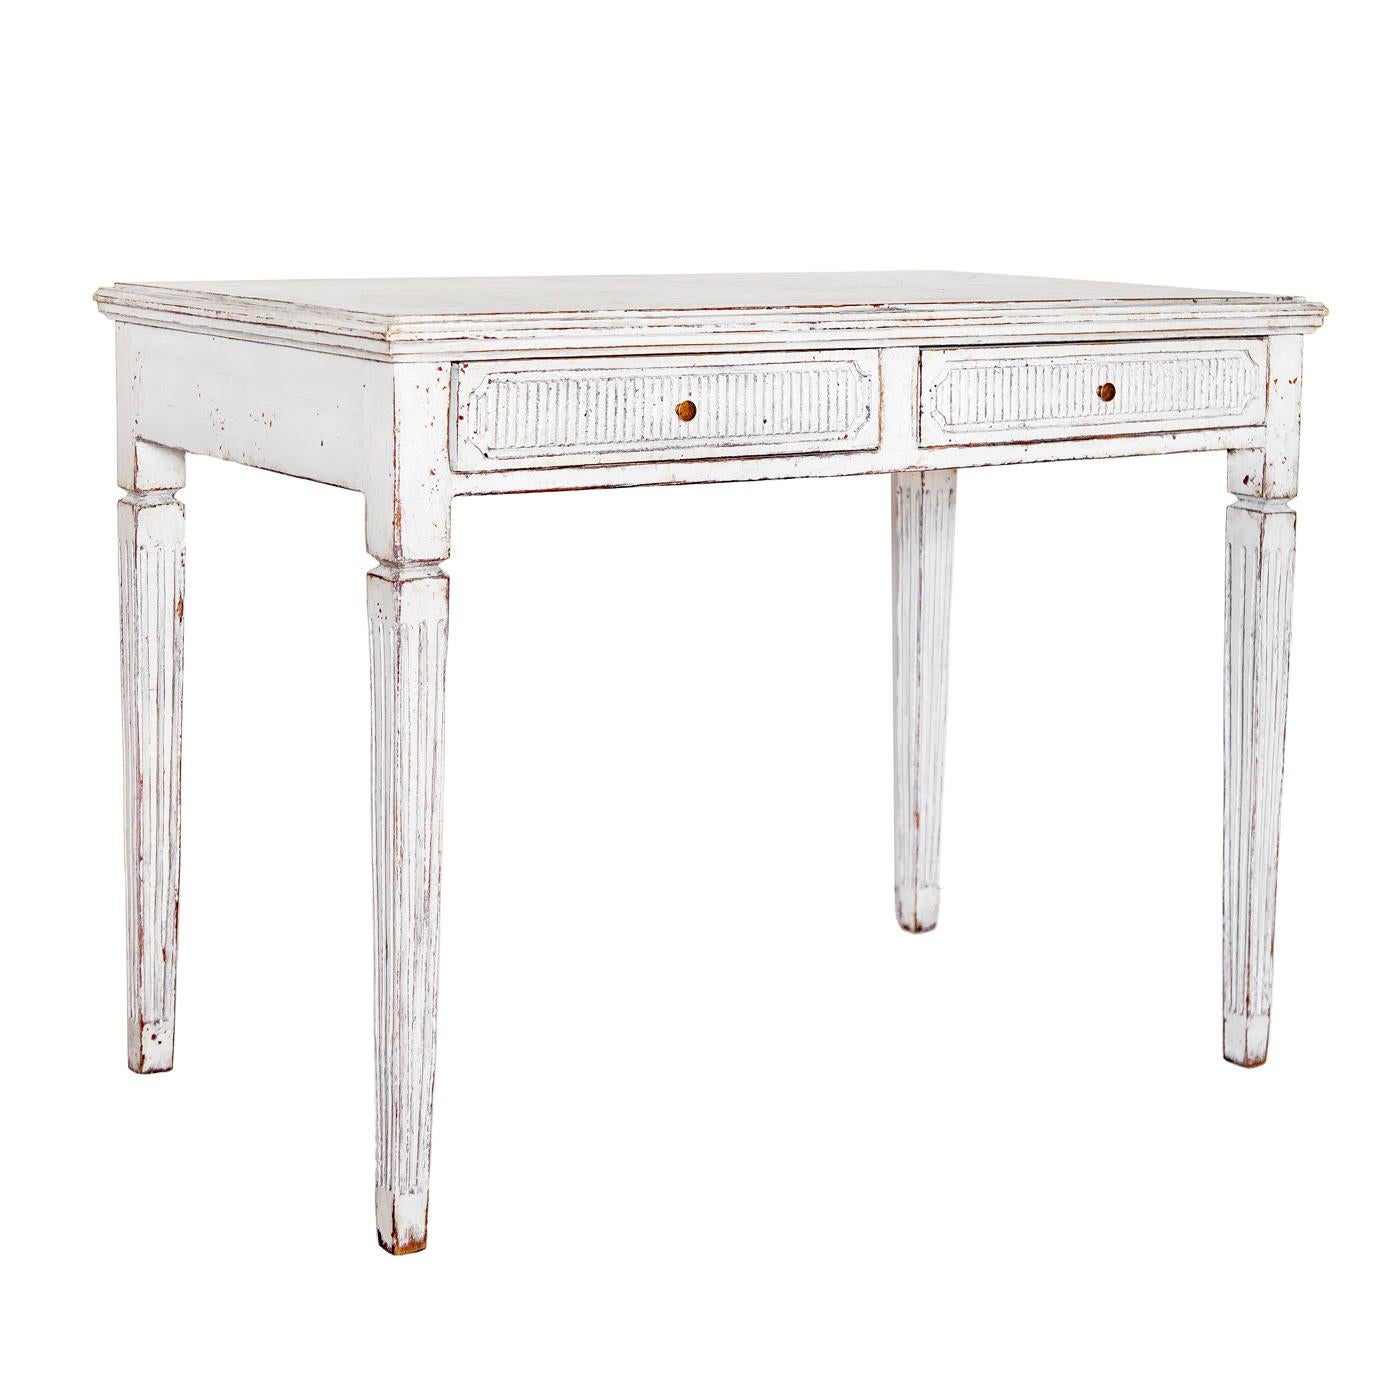 Painted Swedish Antique Gustavian Console Table Desk Grey White Carved Detail 1850-1870 For Sale